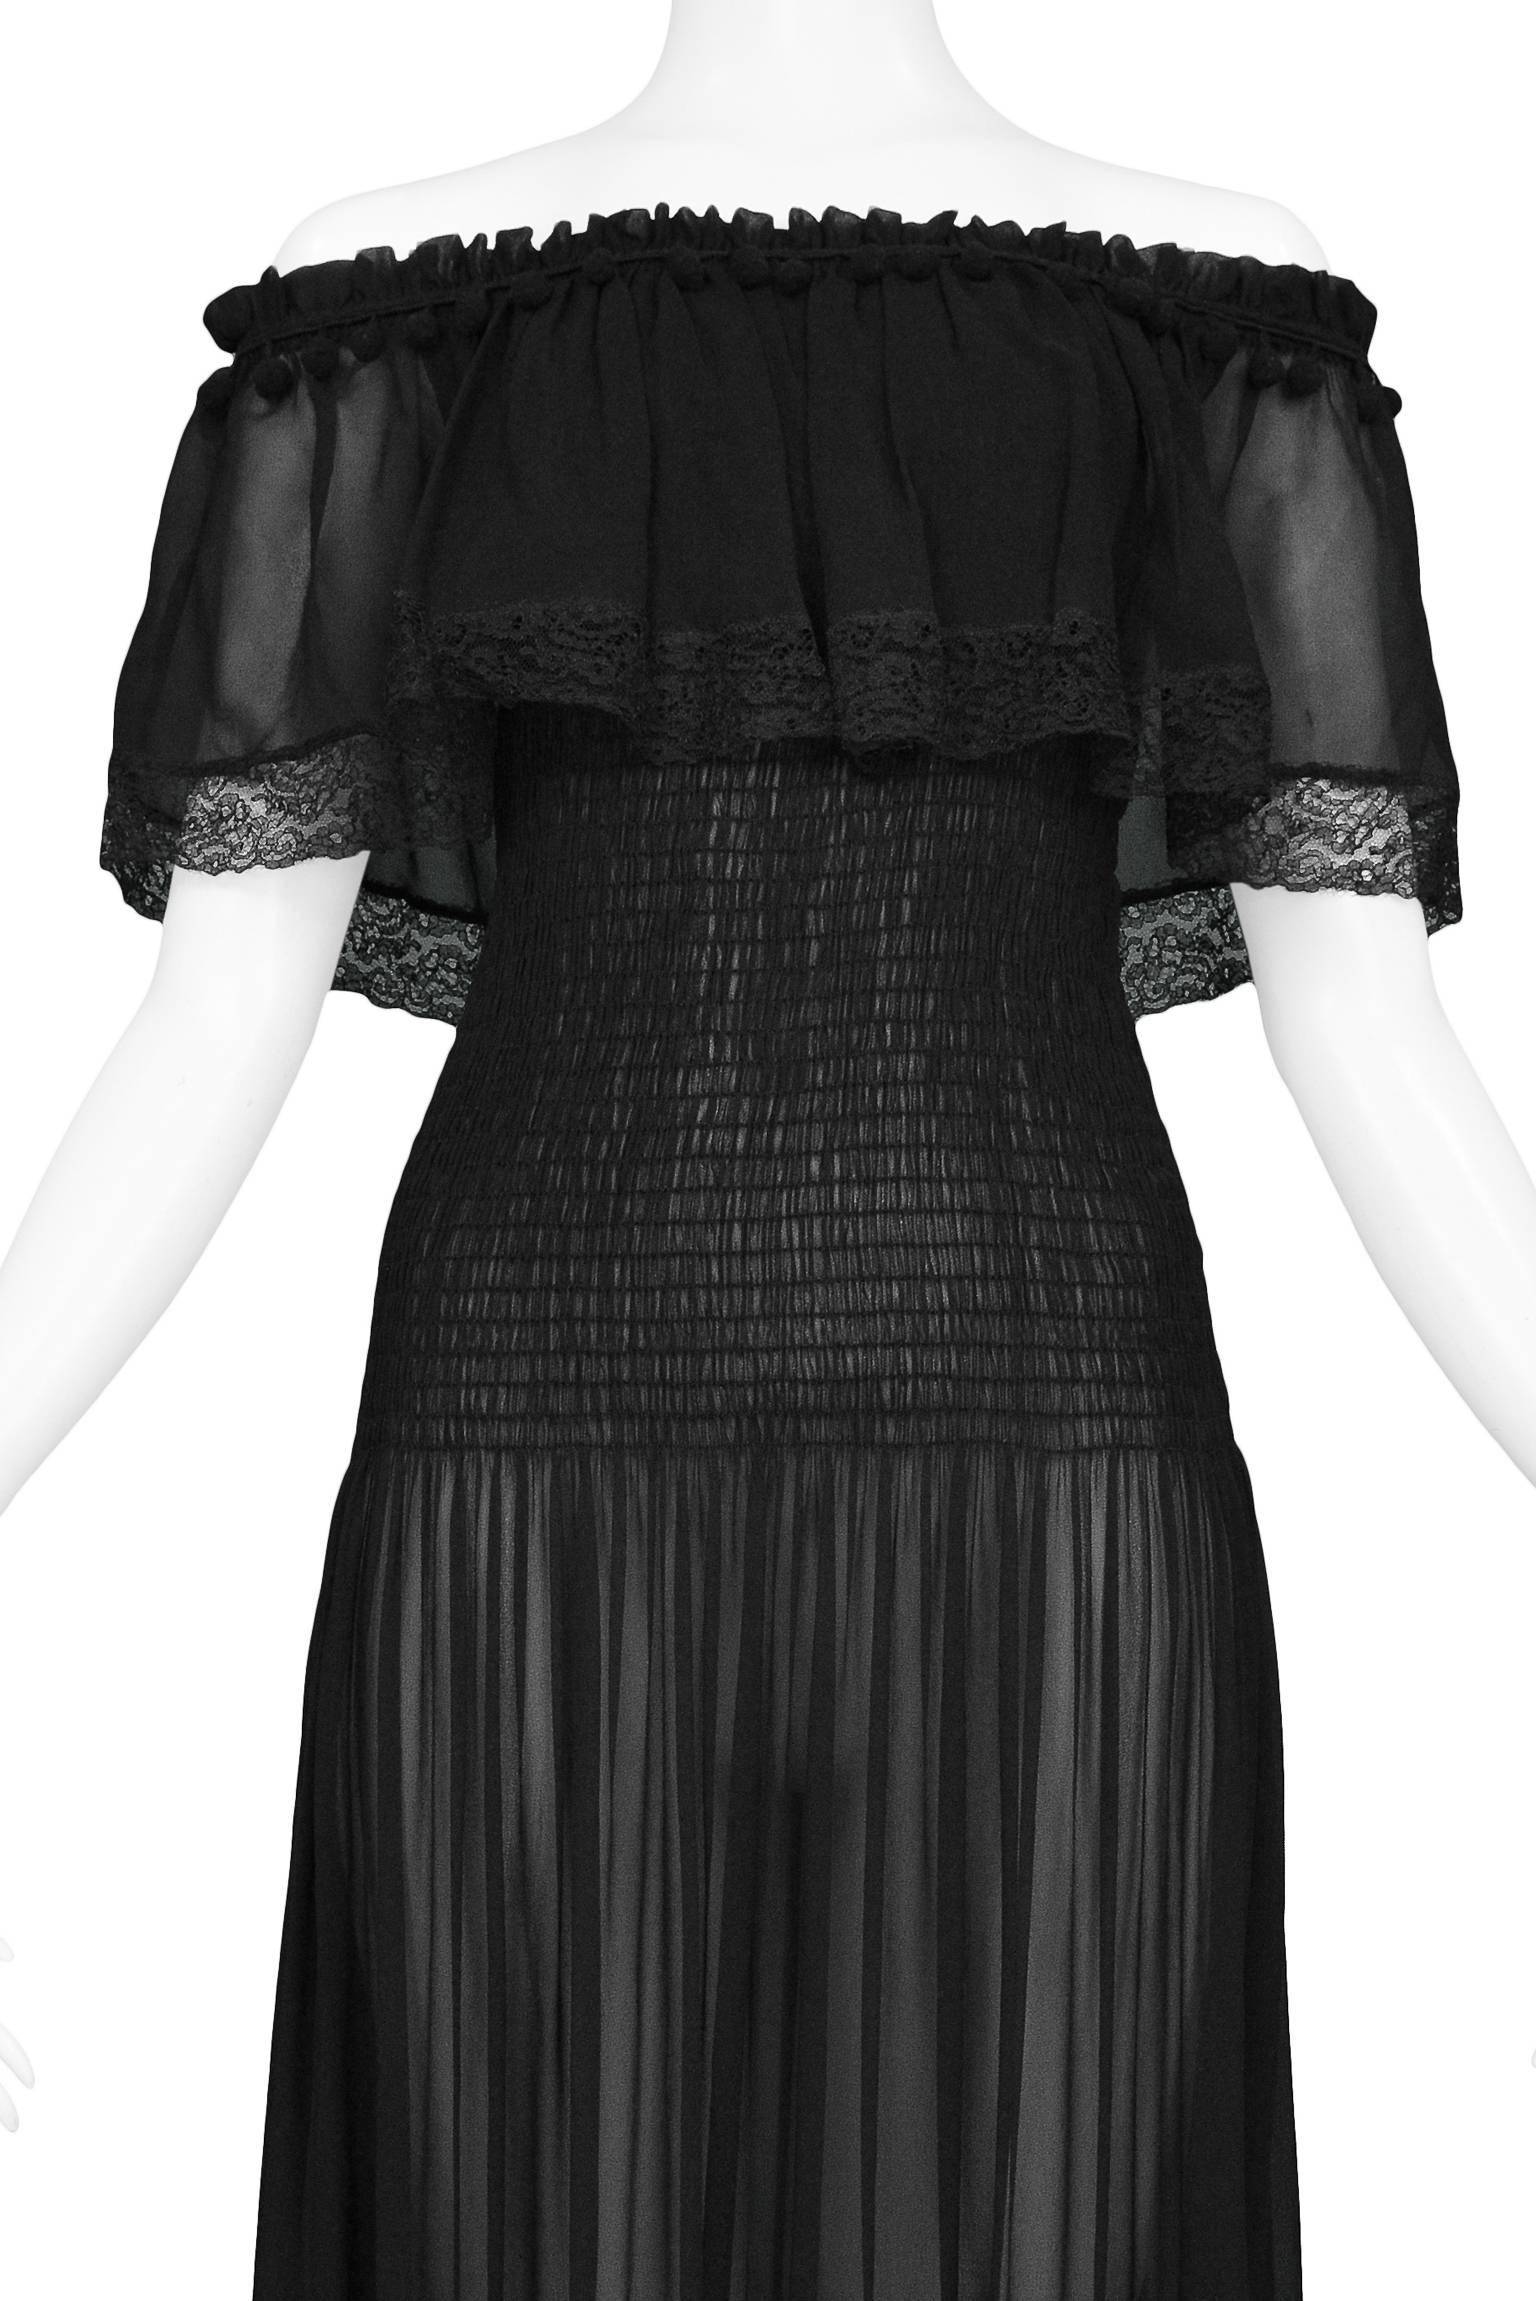 Vintage Yves Saint Laurent black silk chiffon peasant dress featuring pom pom trimmed elastic gathering at the top to keep it suspended off the shoulders.  The semi sheer dress is adorned with black lace trim at the hems and smocking at the middle